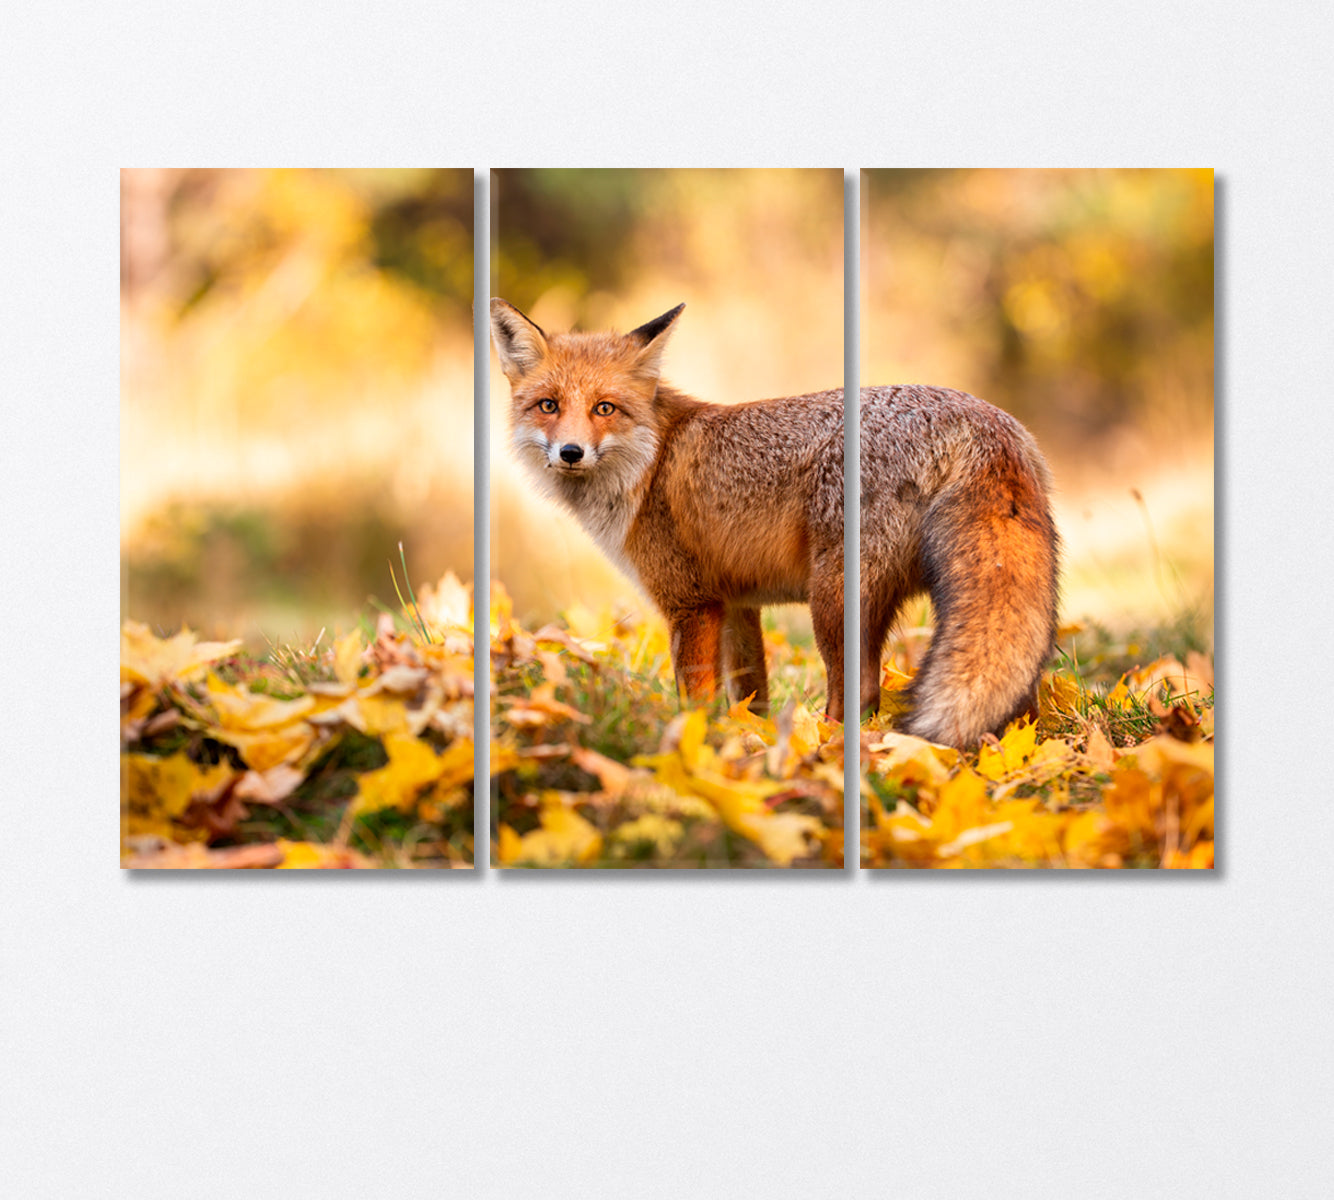 Red Fox Stands on Orange Foliage in the Forest Canvas Print-Canvas Print-CetArt-3 Panels-36x24 inches-CetArt